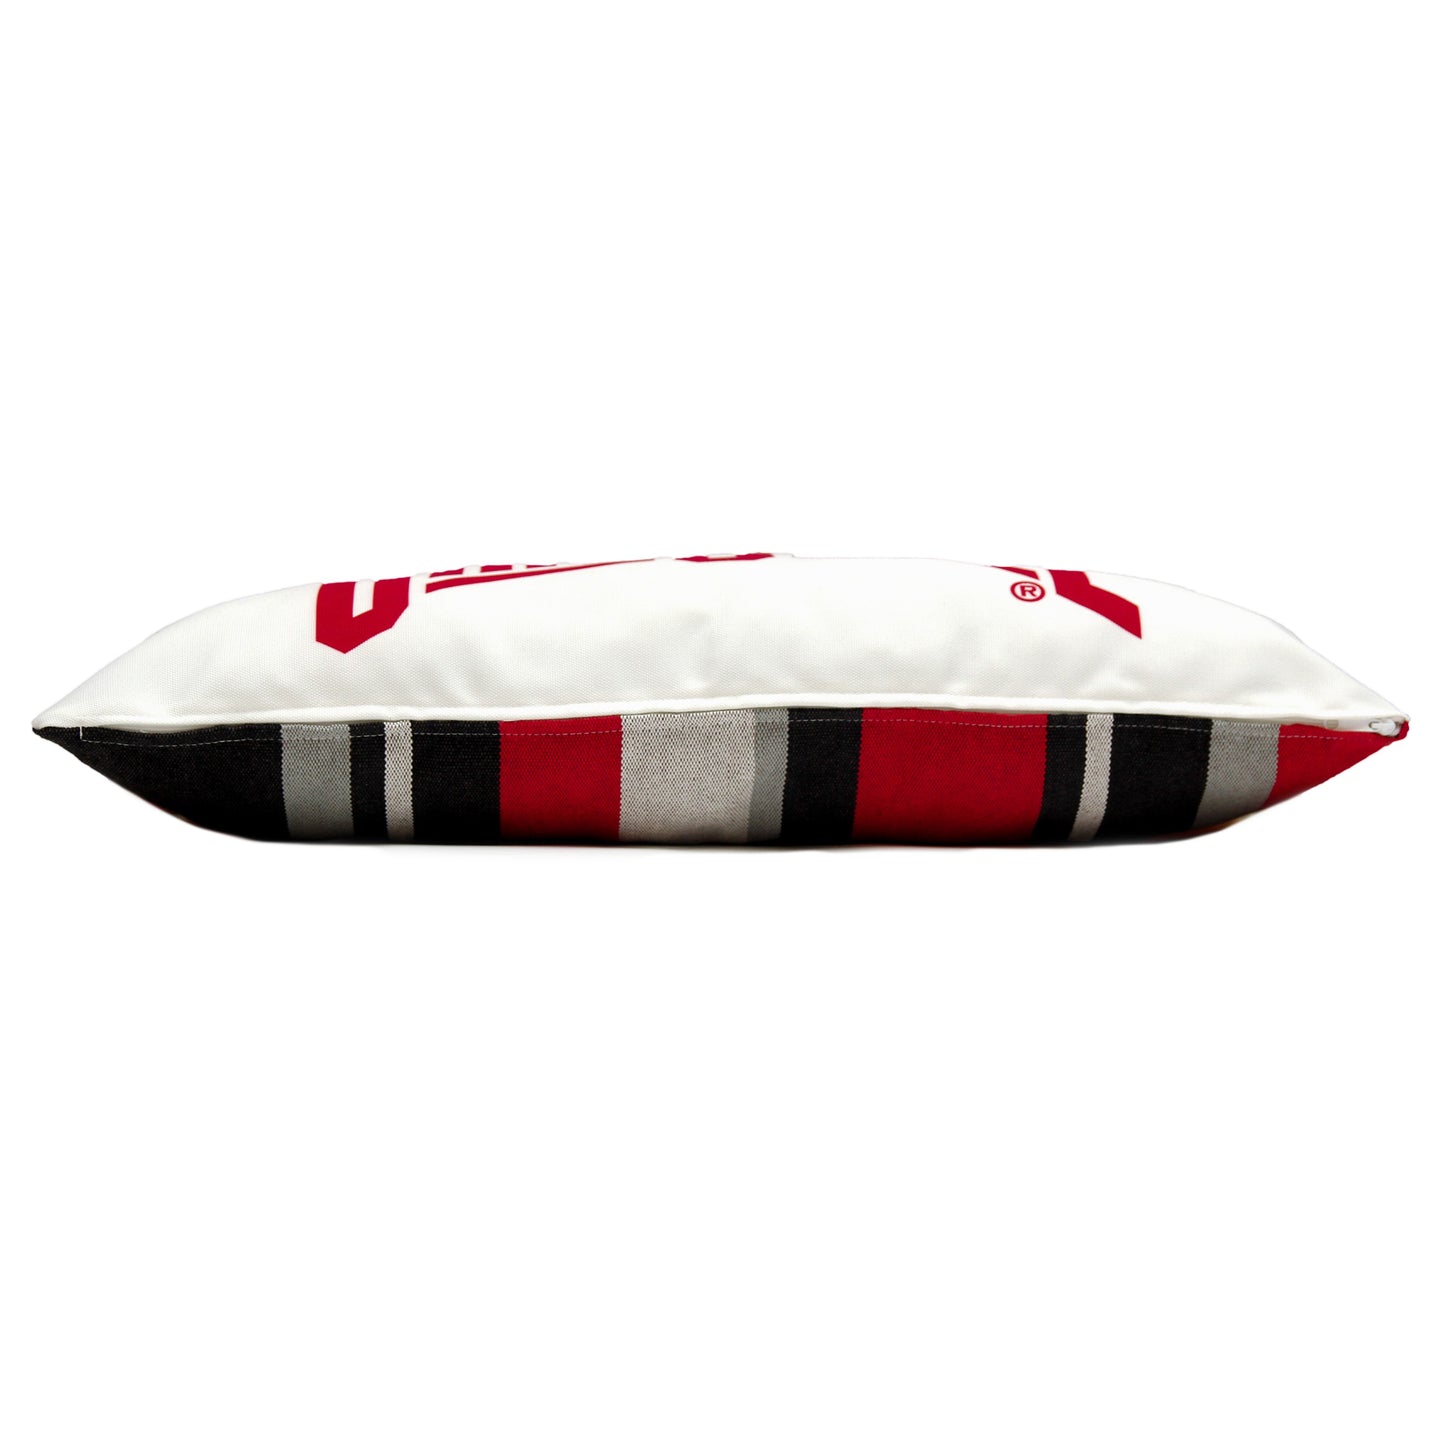 Ohio State cushion pillow with zipper